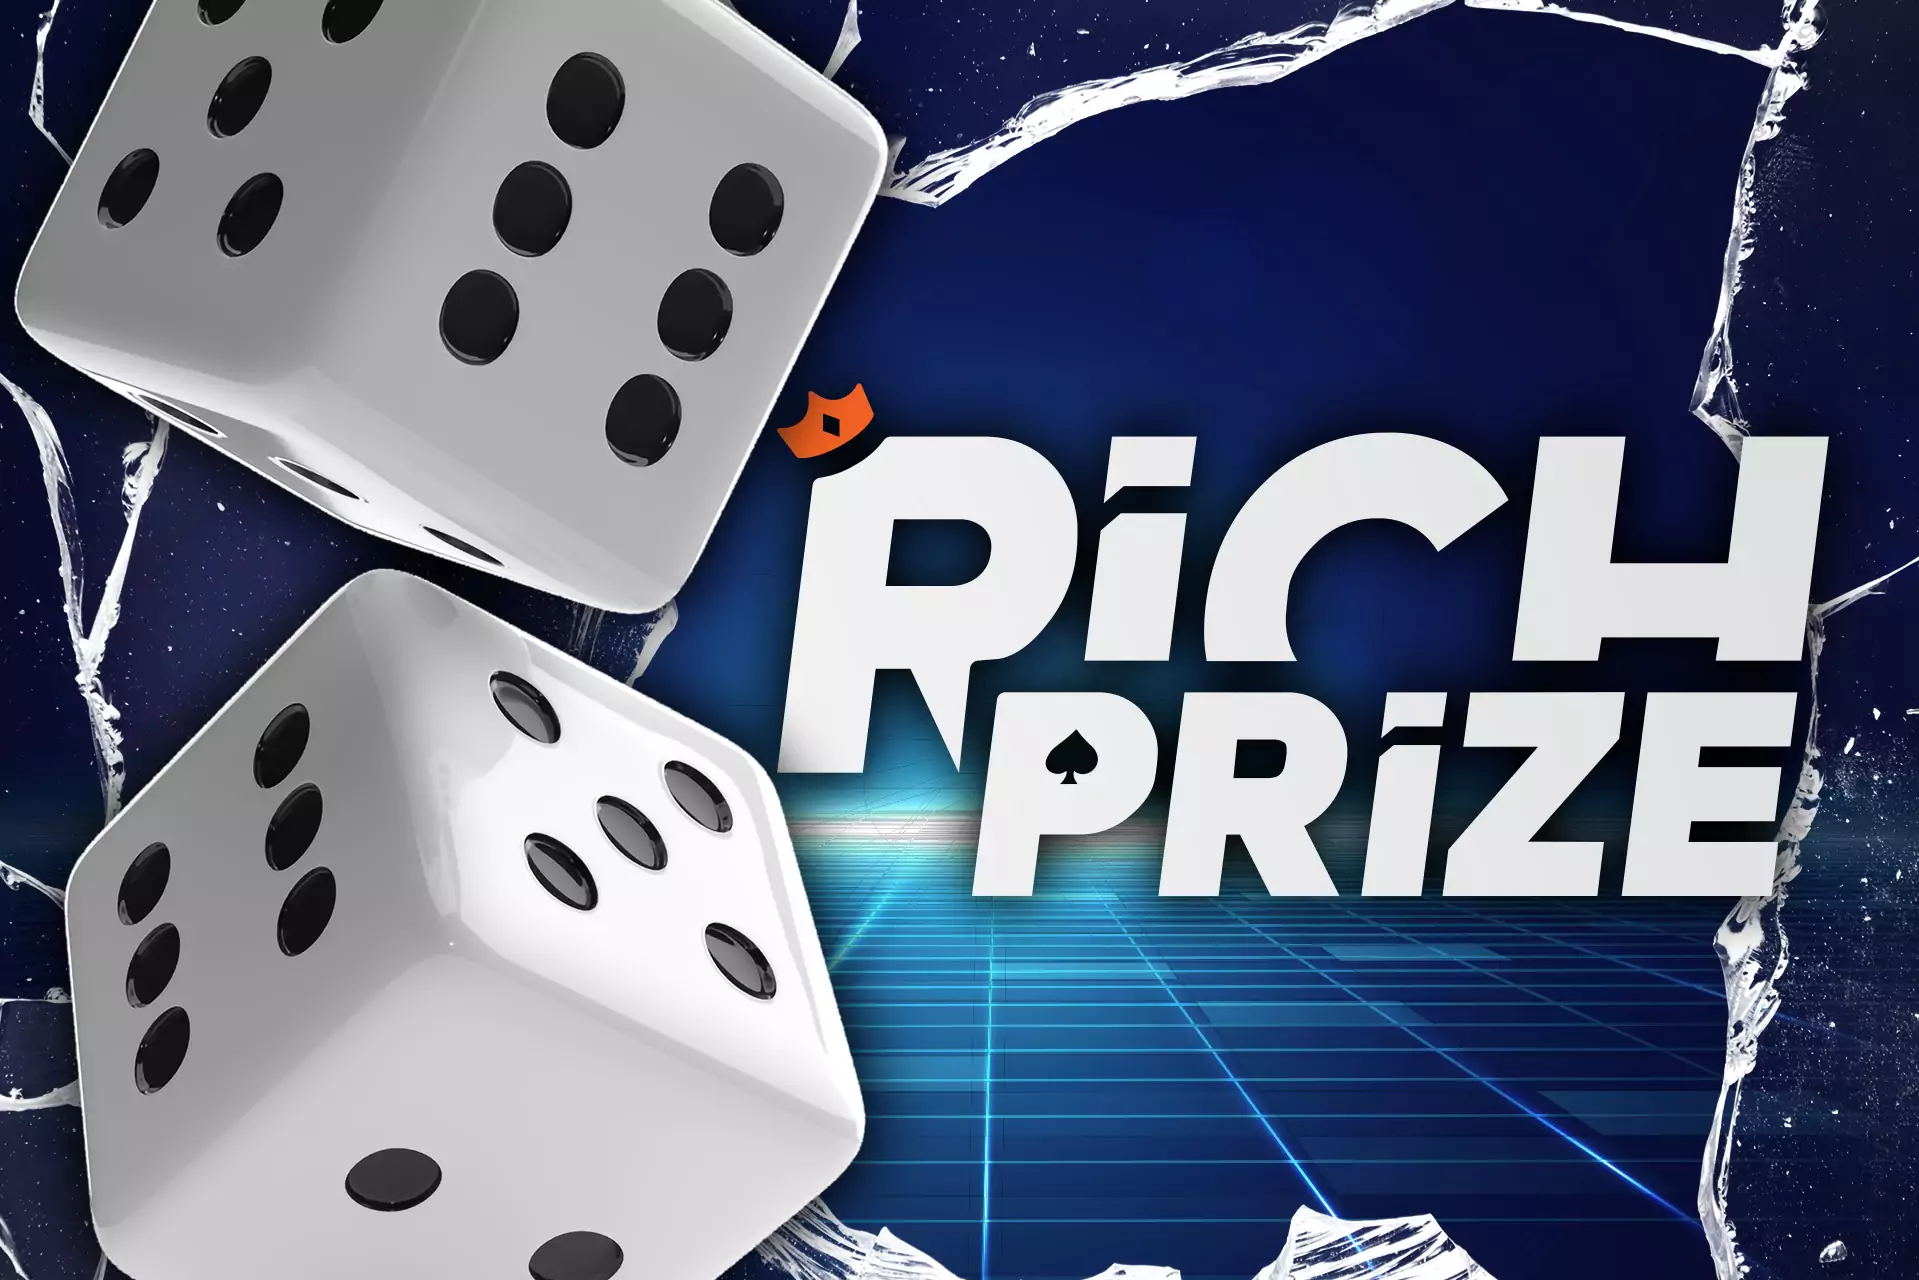 Users of RichPrize appreciate distinguishable betting options available on the site.